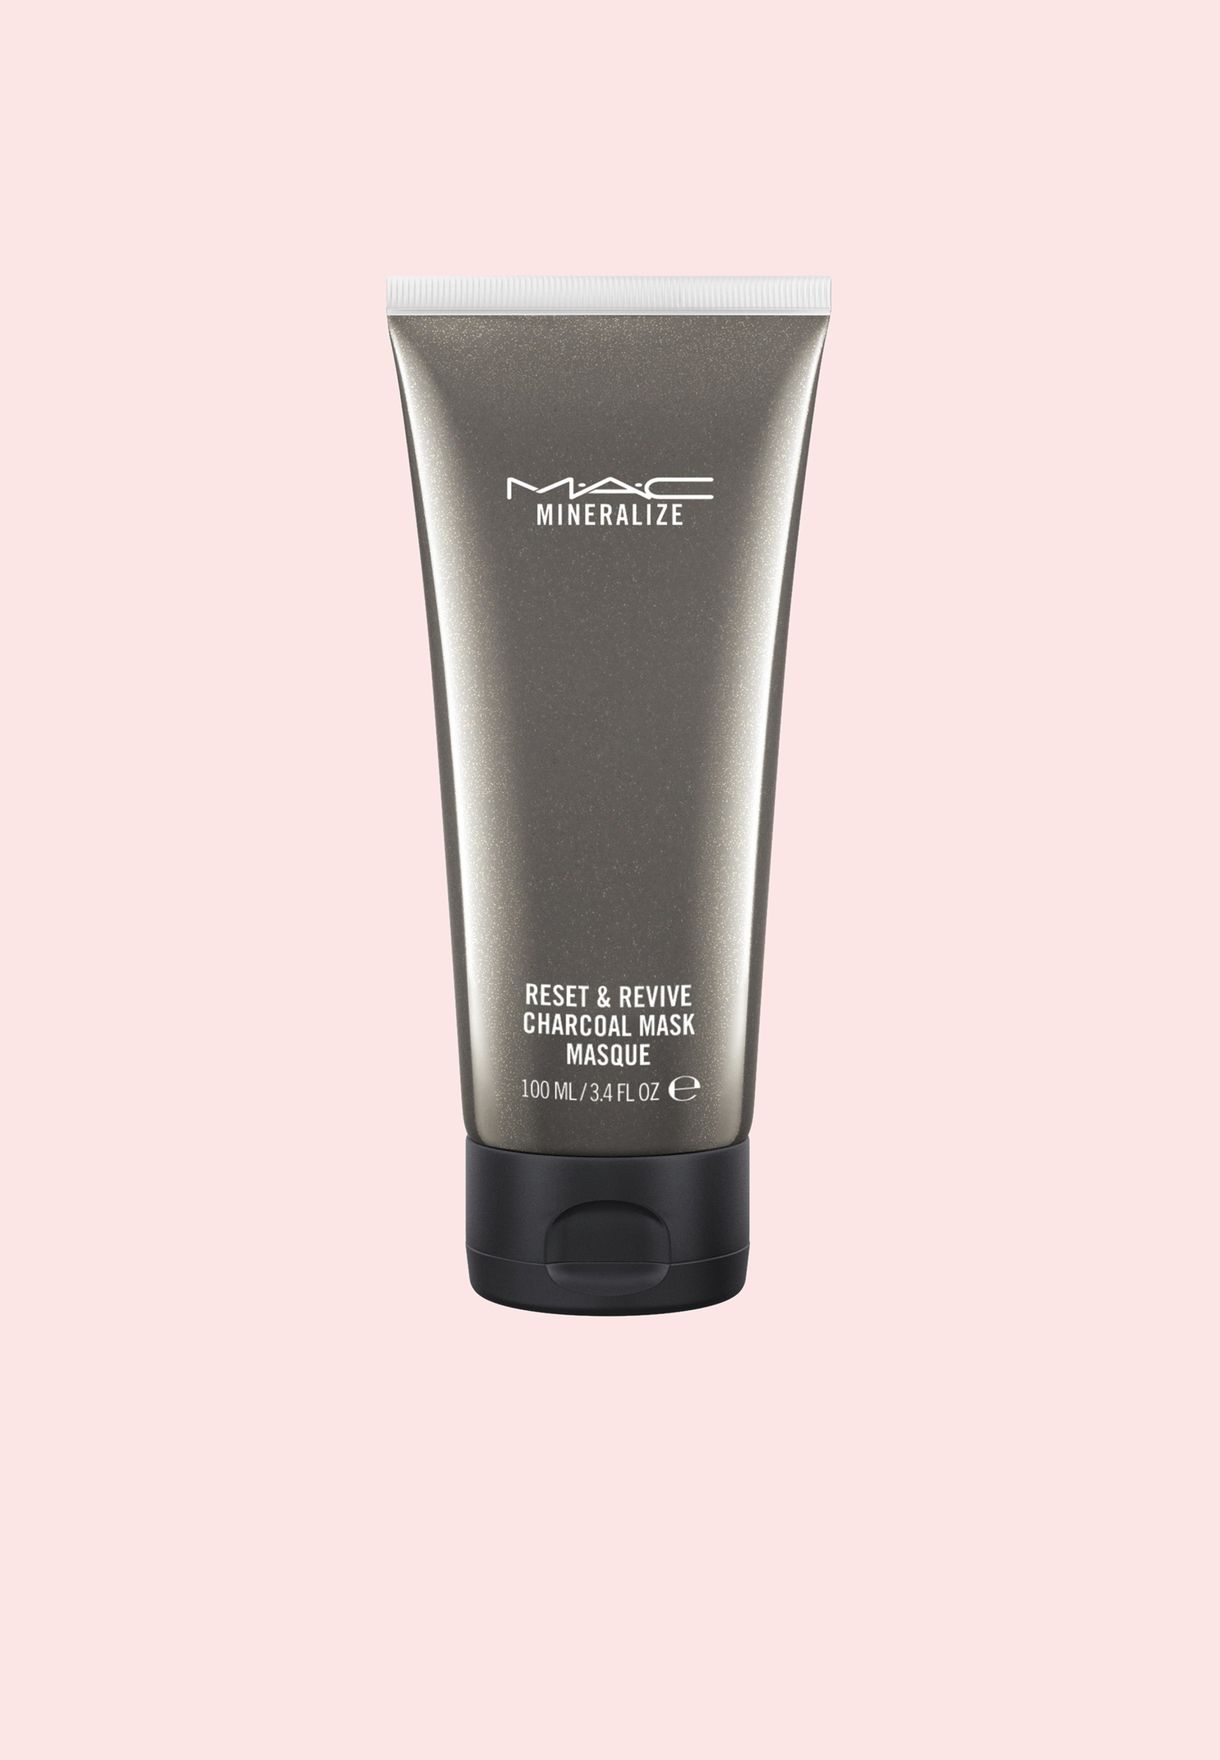 Mineralize Reset & Revive Charcoal Mask - 100ml